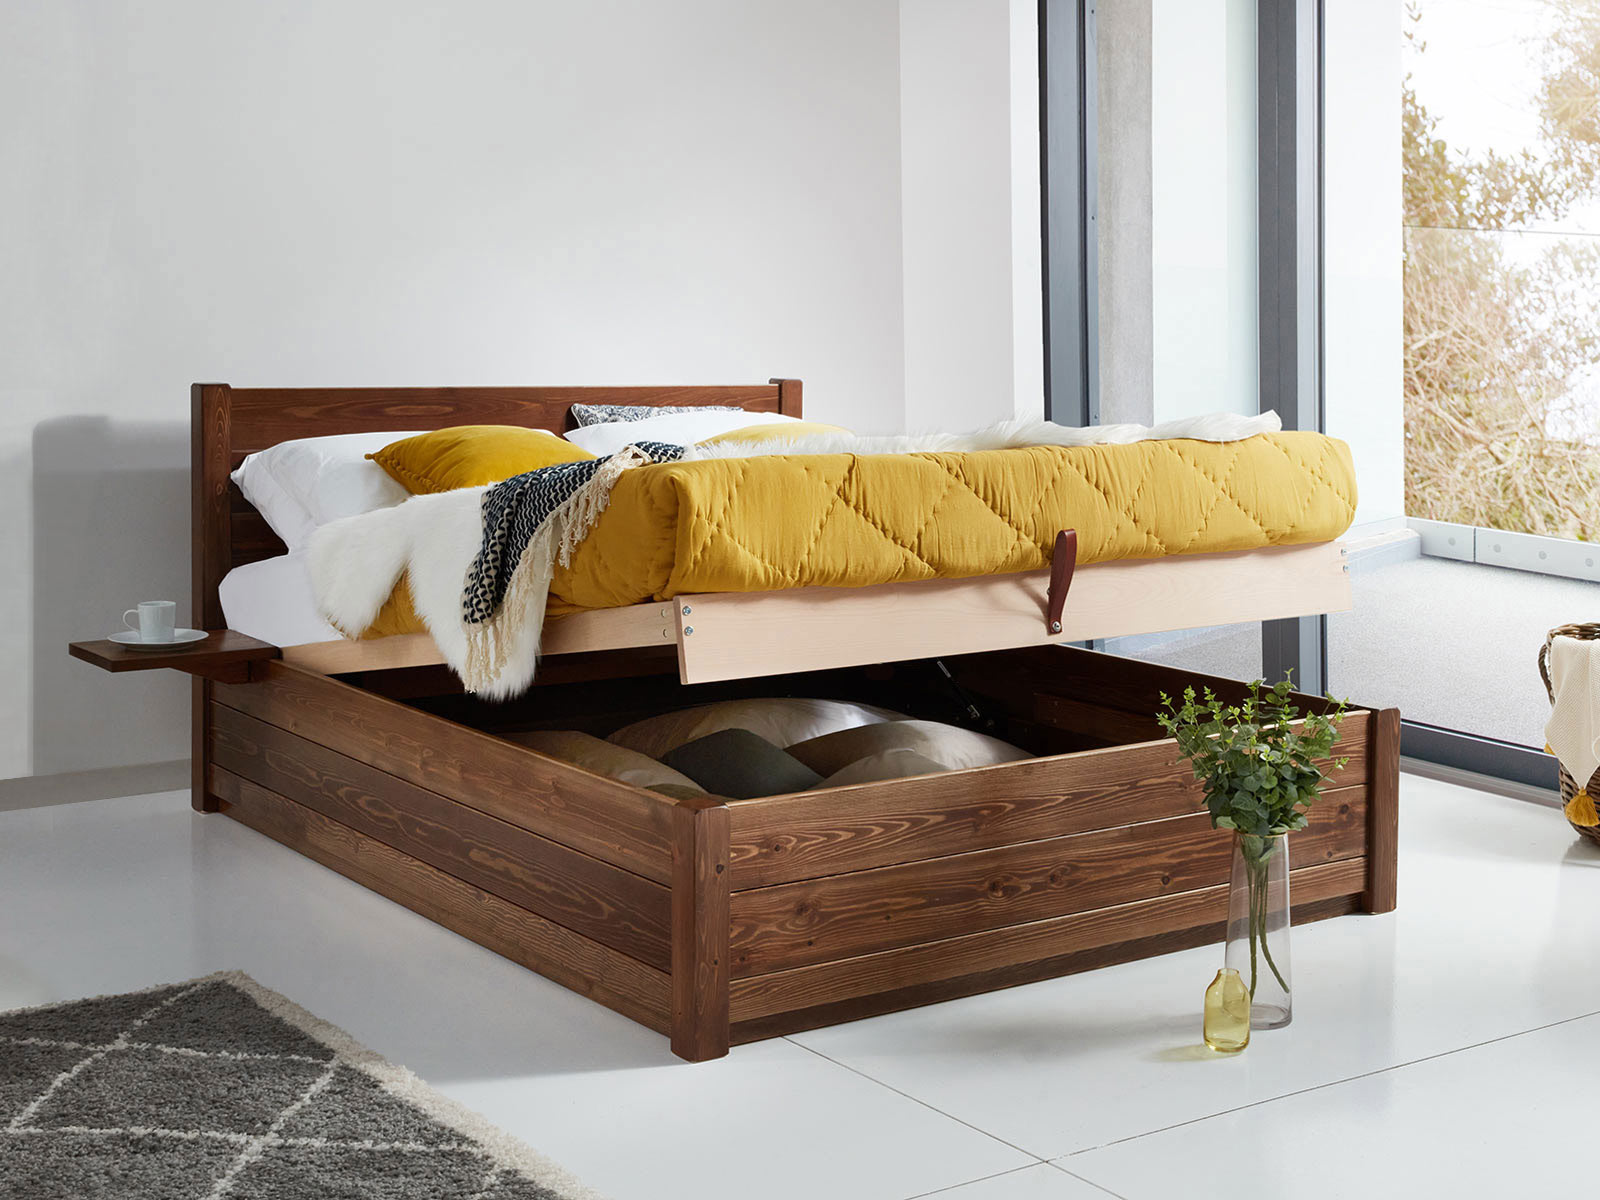 Ottoman Storage Bed Get Laid Beds, What Is A Storage Bed